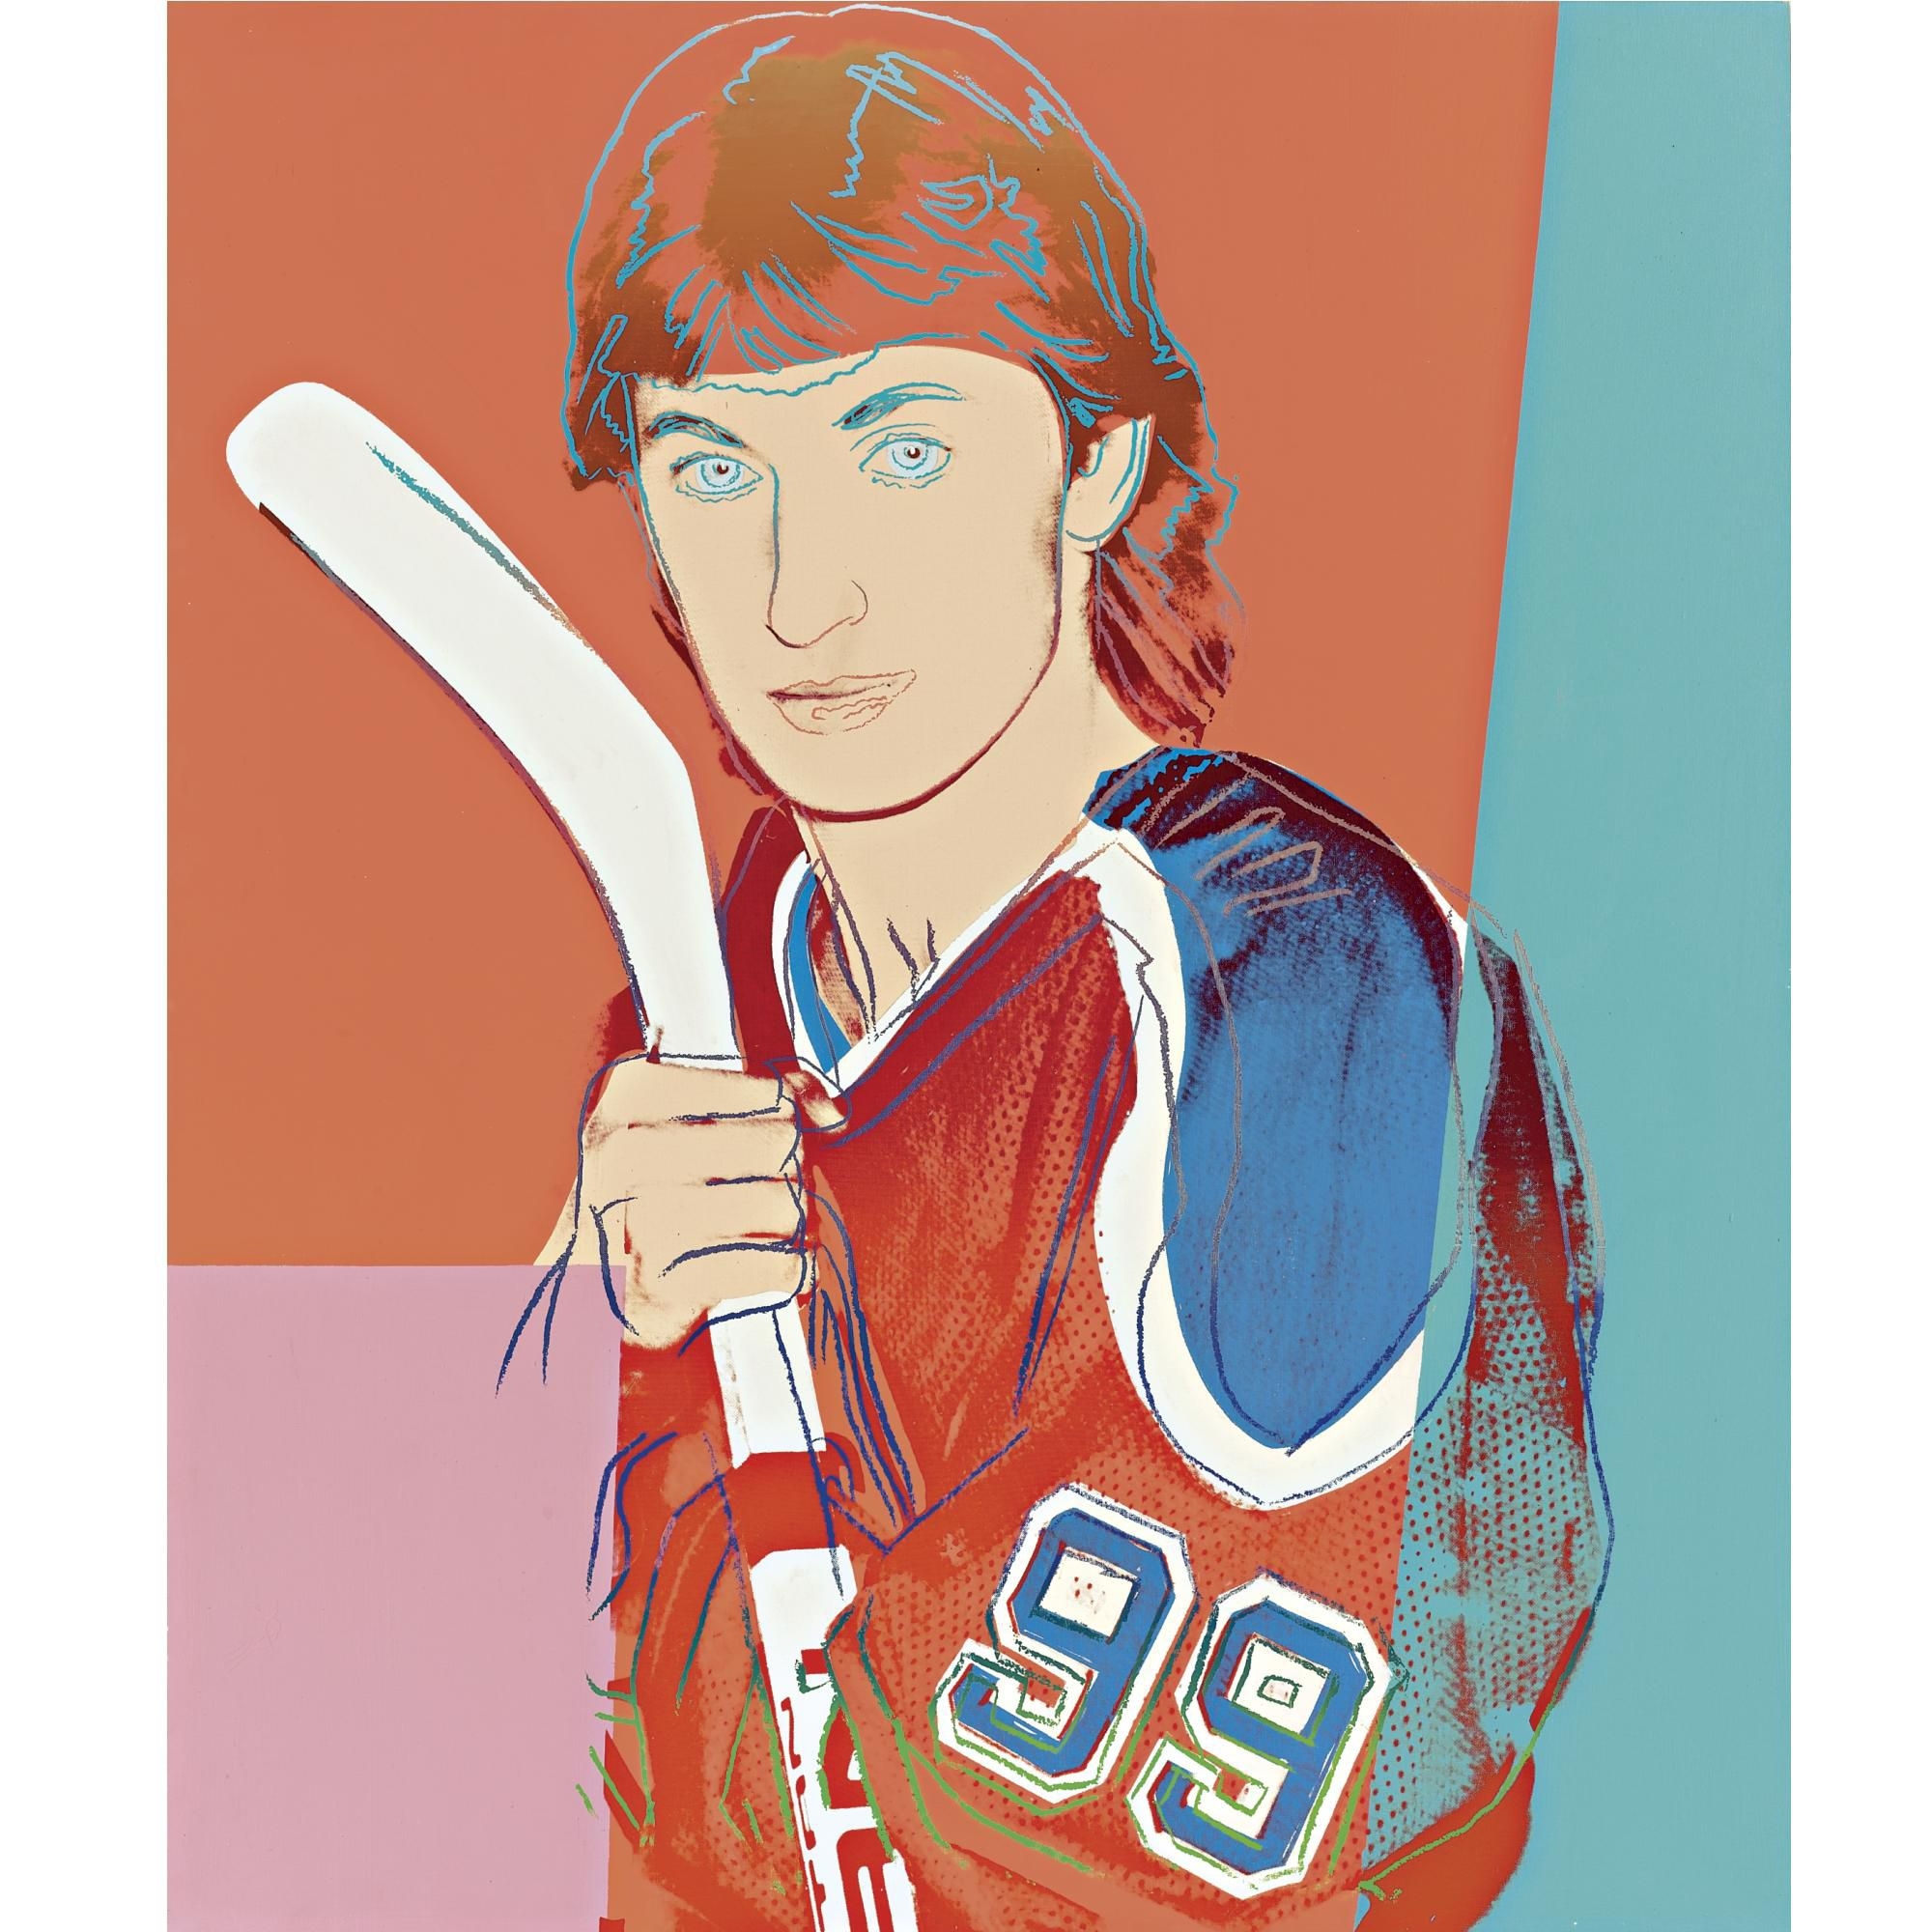 Artwork by Andy Warhol, Wayne Gretzky, Made of acrylic and silkscreen ink on canvas